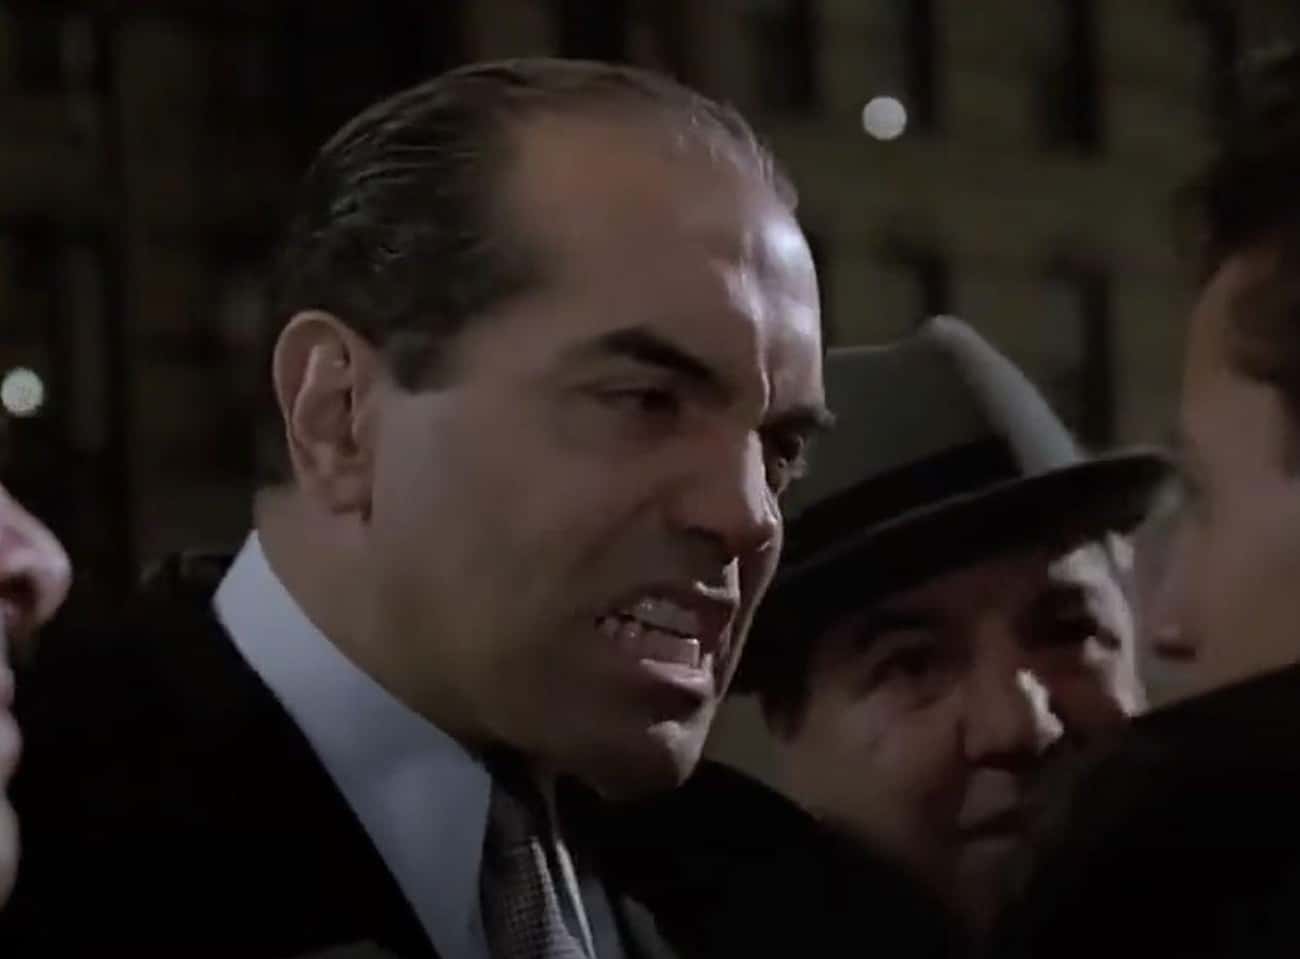 Chazz Palminteri Based The Scene In ‘A Bronx Tale’ Where A Kid Witnesses A Mob Shooting But Keeps His Mouth Shut On His Own Life